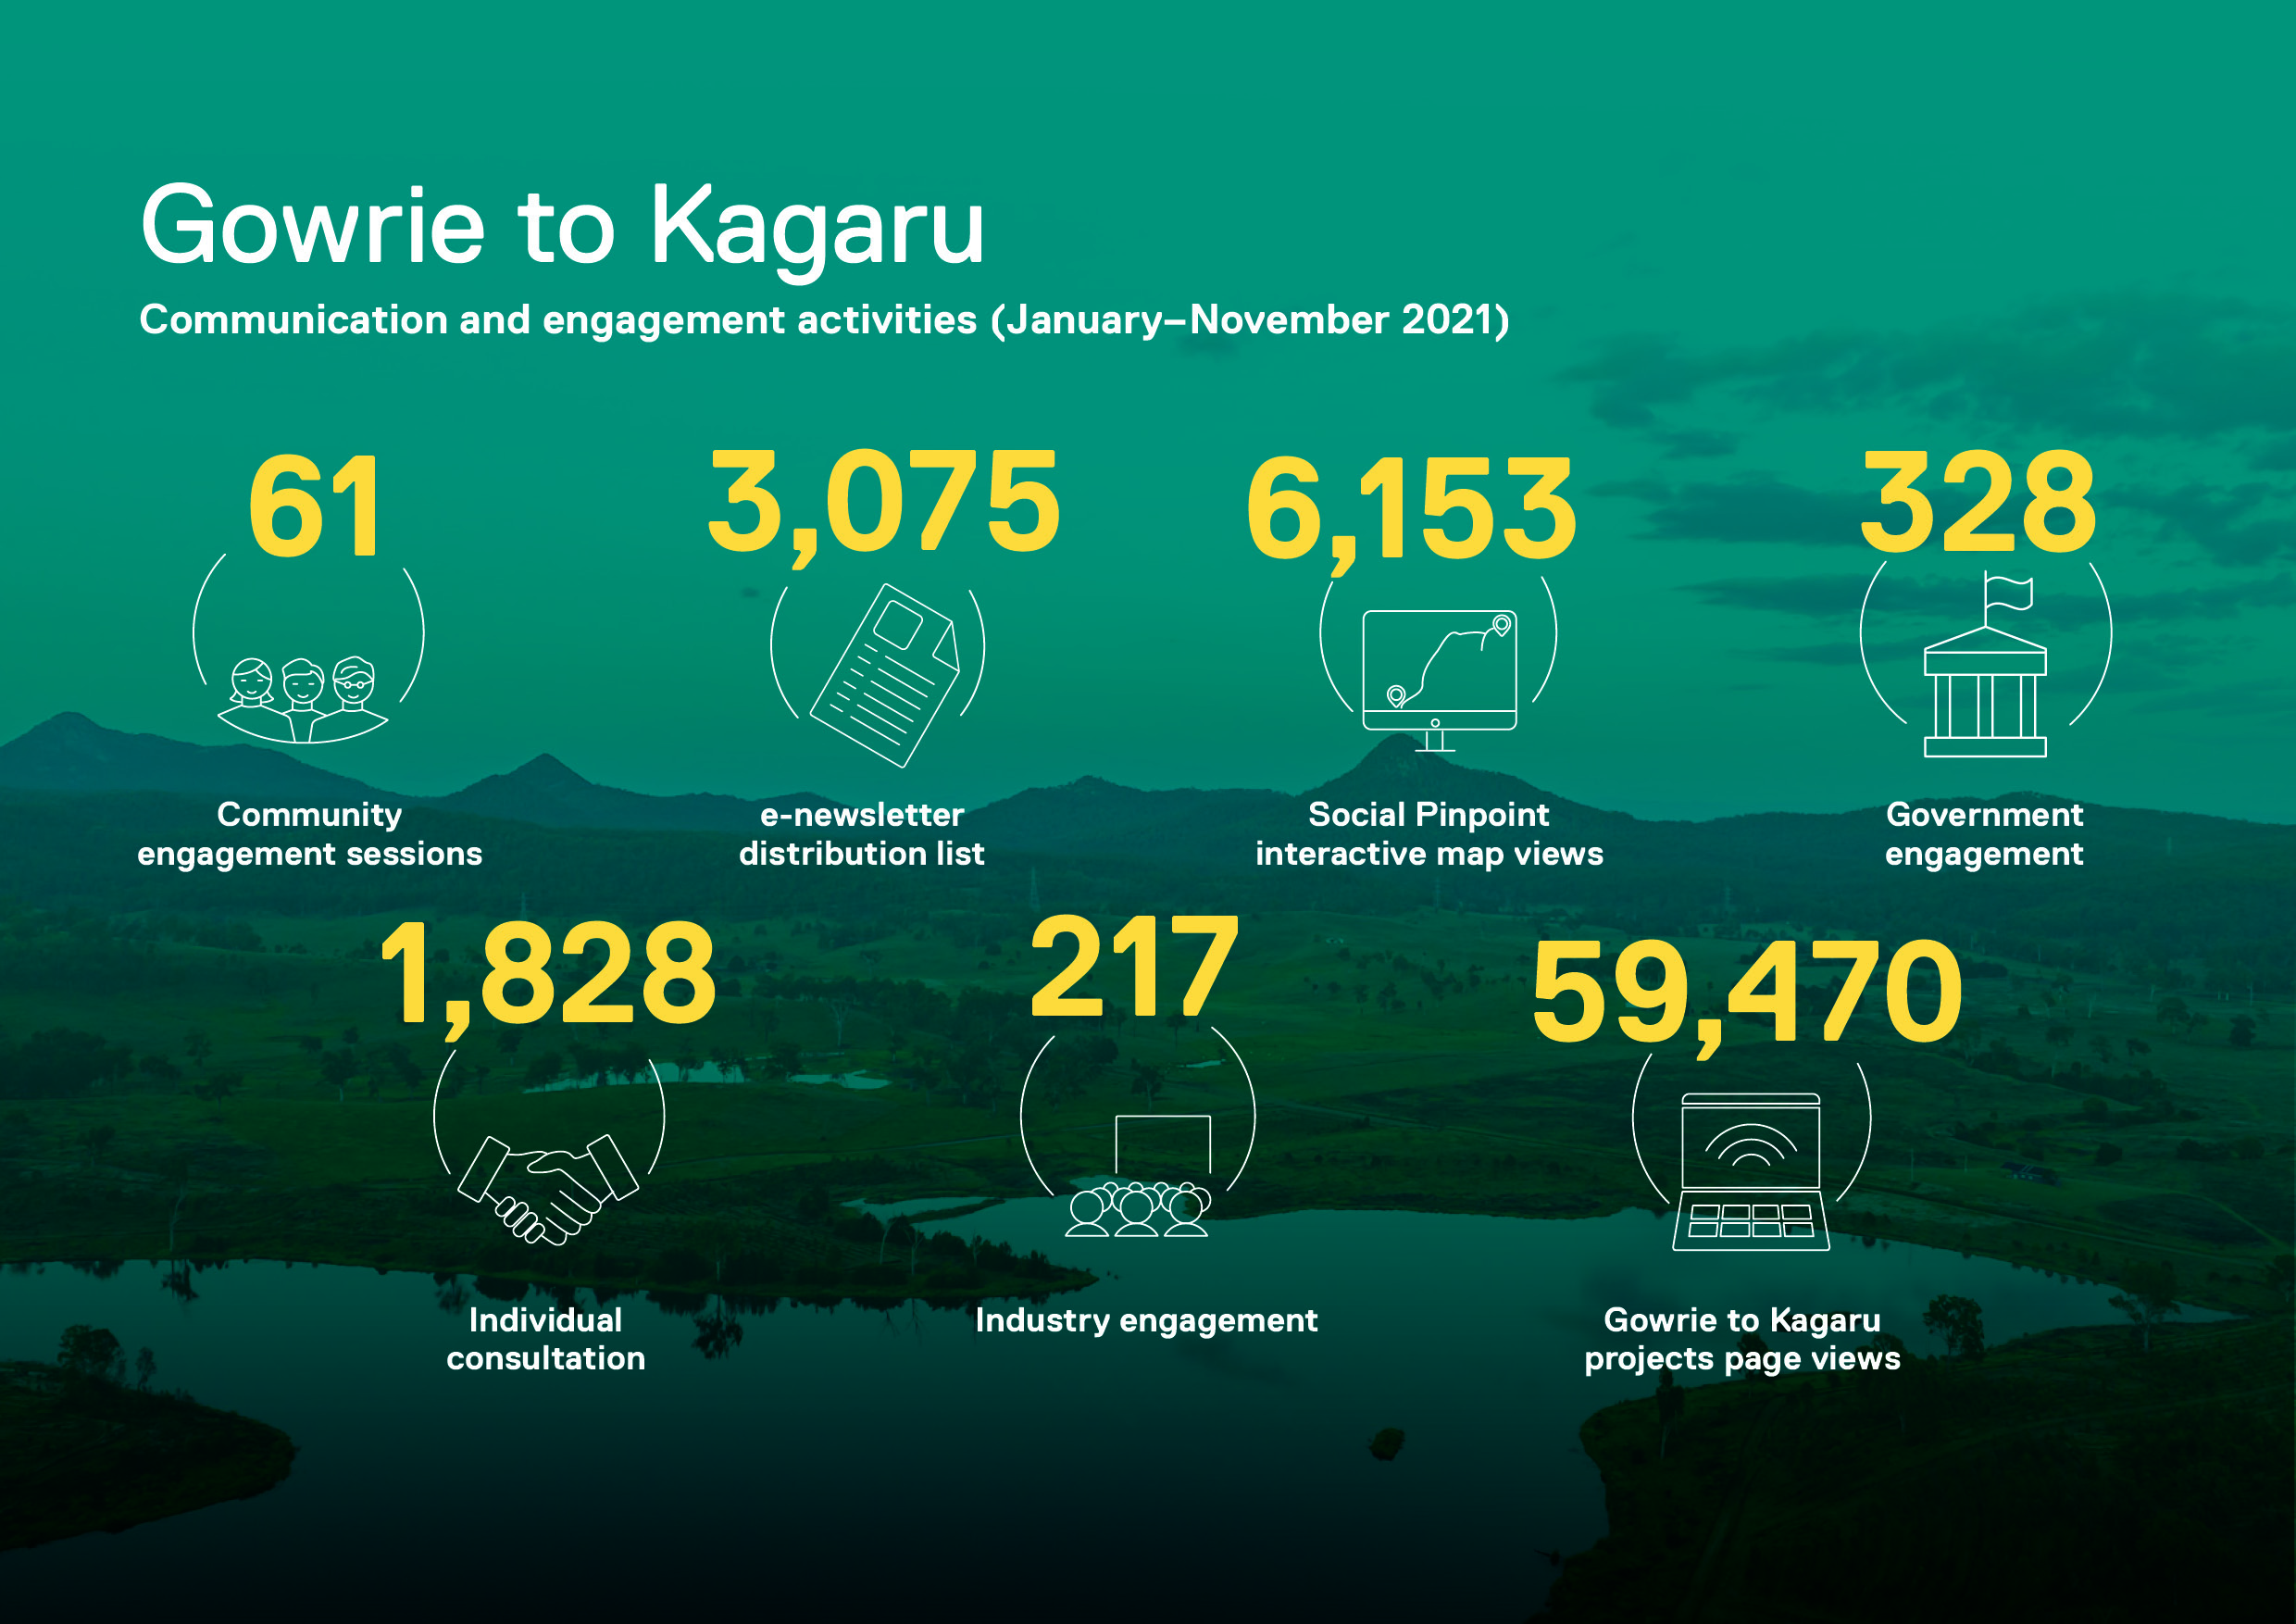 Infographic showing a snapshot of statistics for the Gowrie to Kagaru projects in 2021